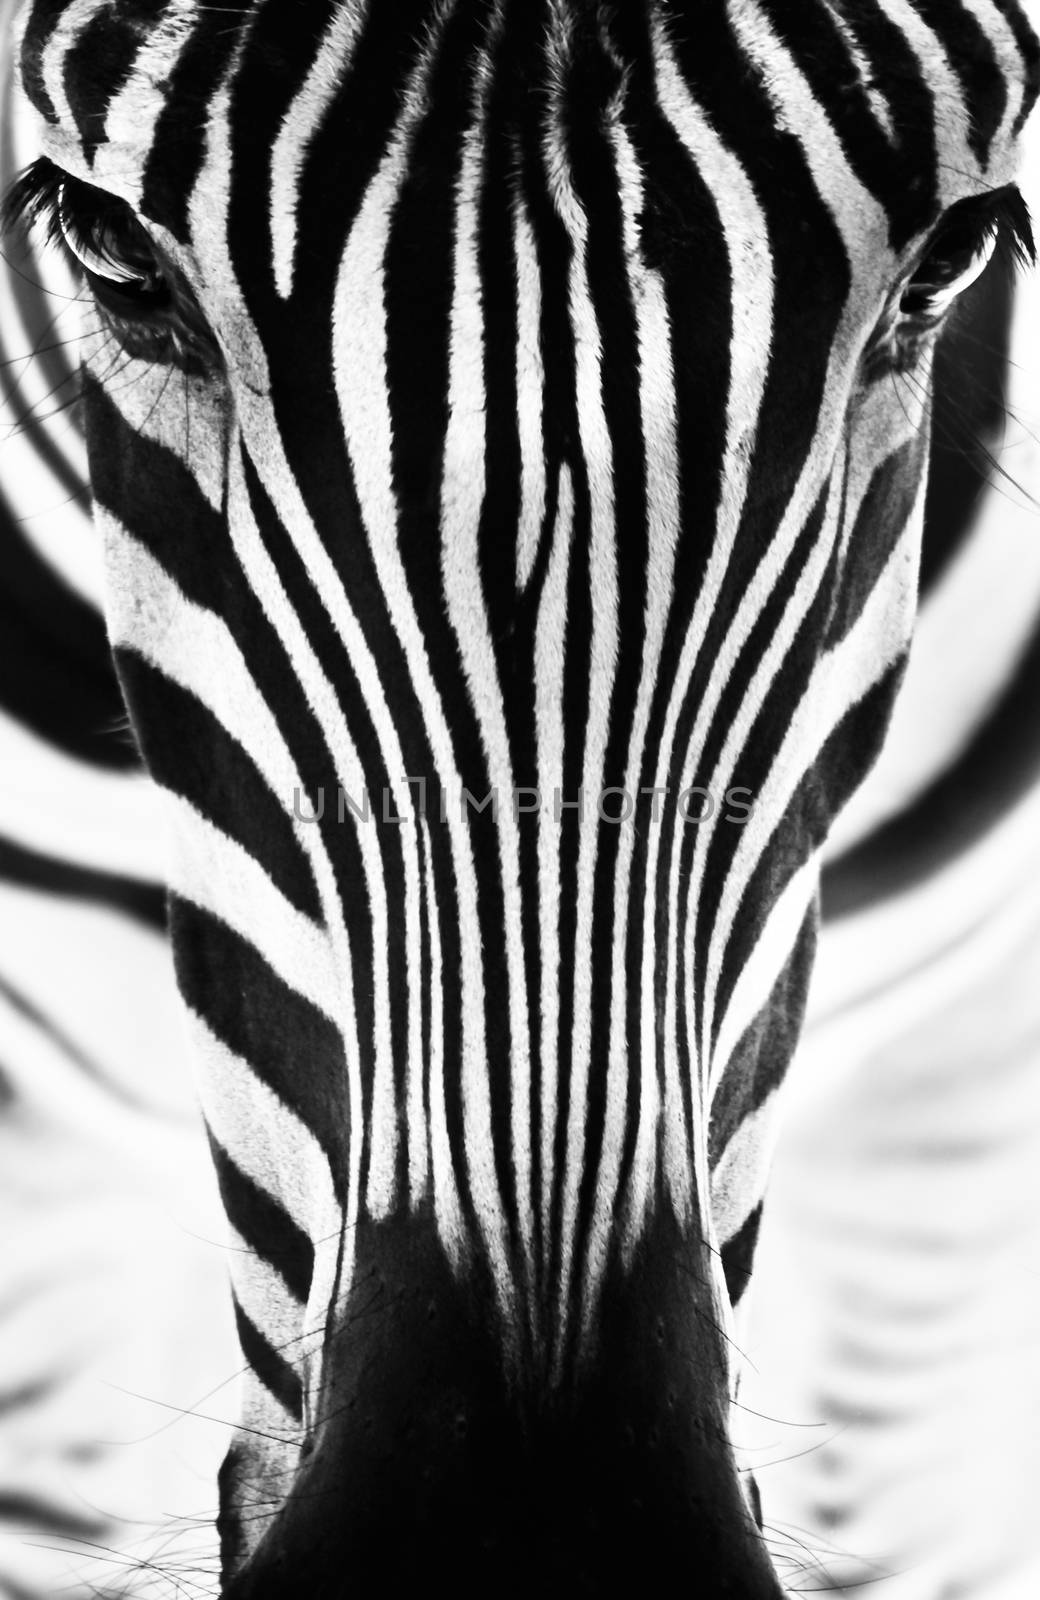 Artistic closeup portrait of a zebra. Graphical pattern. Black and white photo.